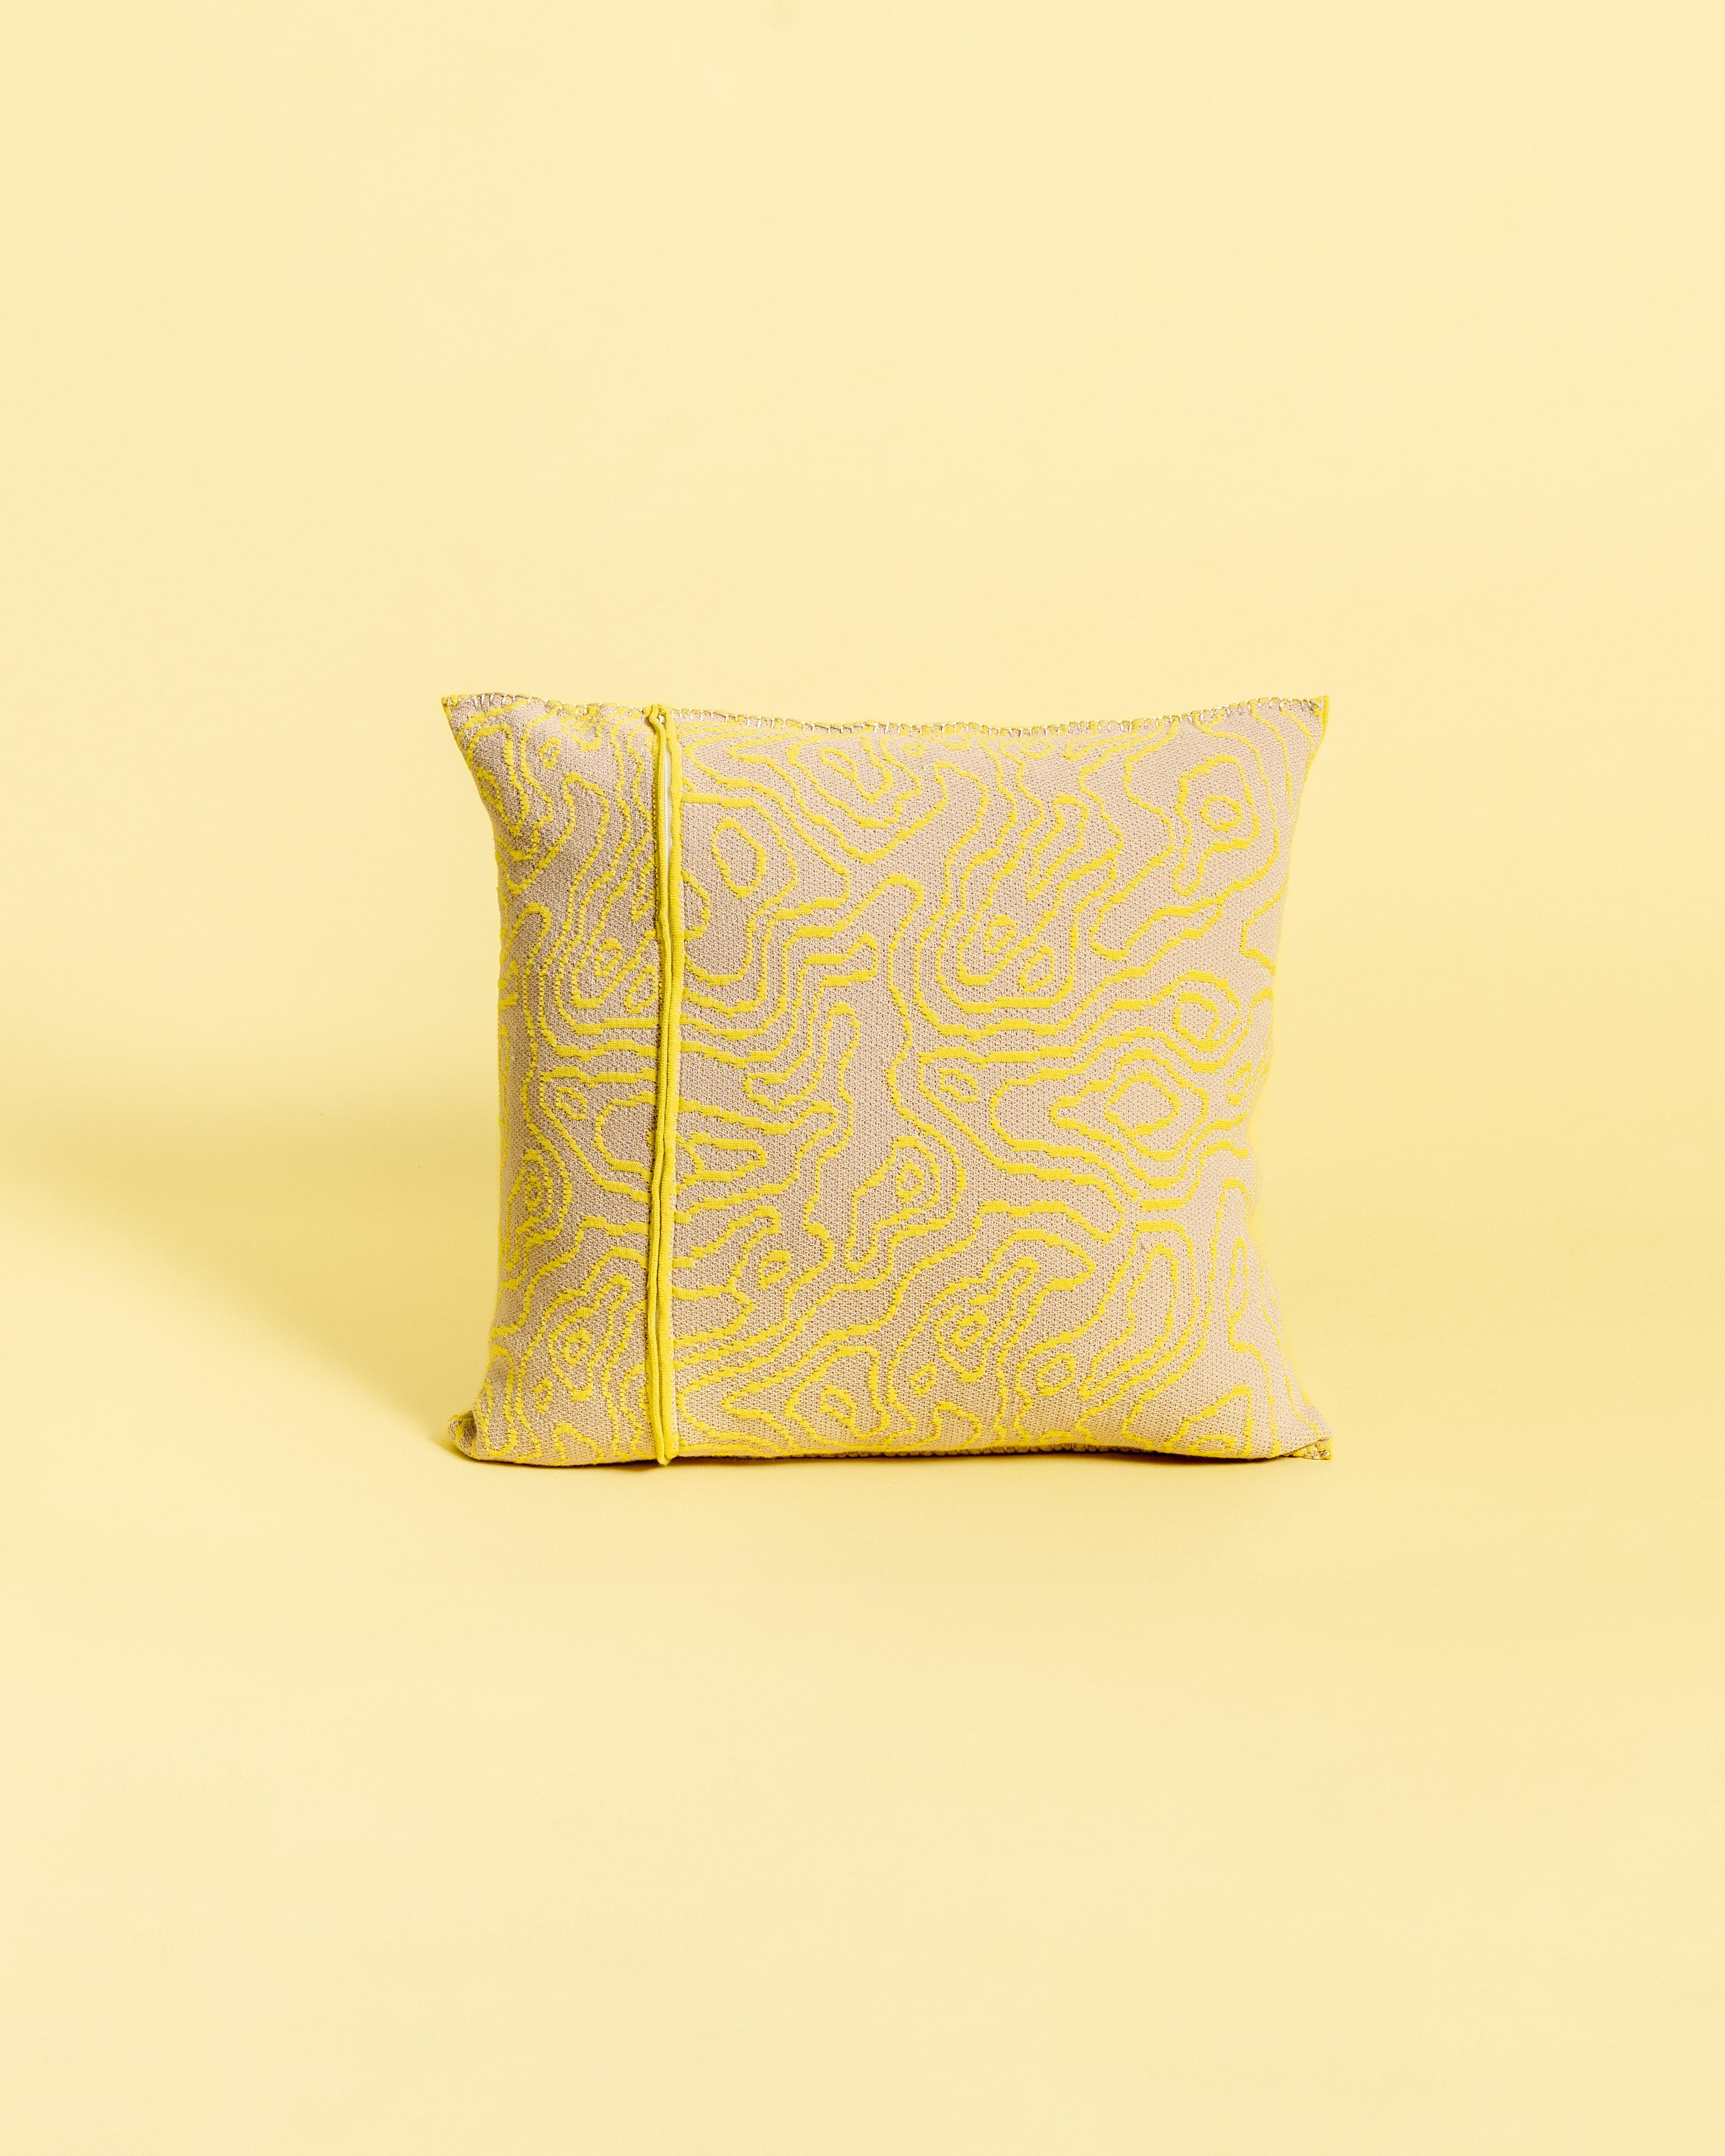 This product belongs to our Collection N°1 - a collection that is a fun exploration of fluidity, spontaneity and non-linearity.

Soft, shiny and smooth- this pillowcase brings high comfort and color to your home. It is made from stretchy viscose,